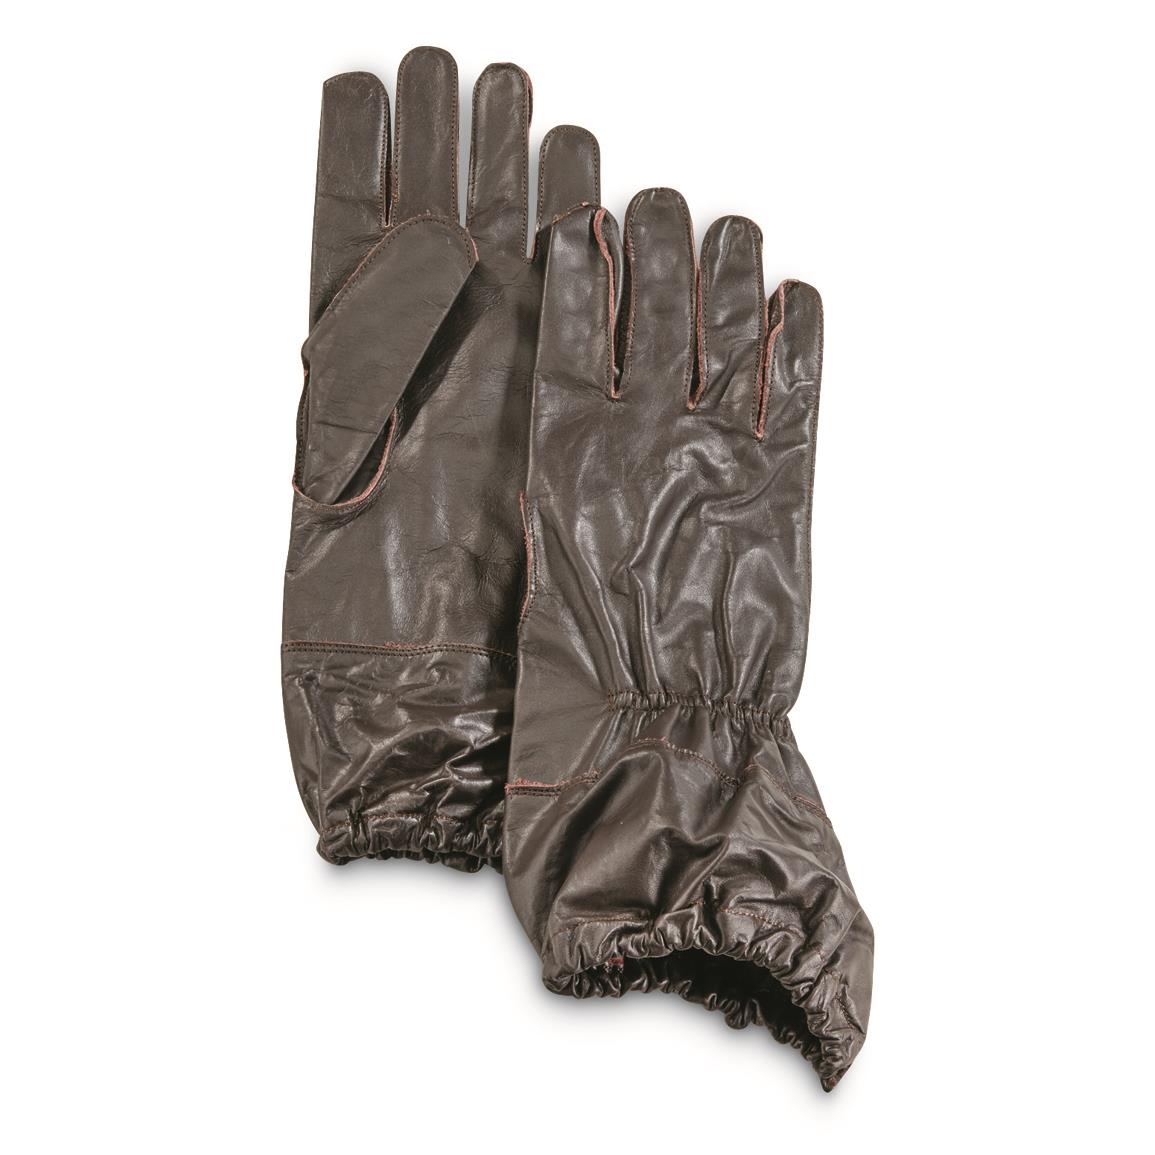 Mil-Tec German Military Reproduction WWII Paratrooper Gloves